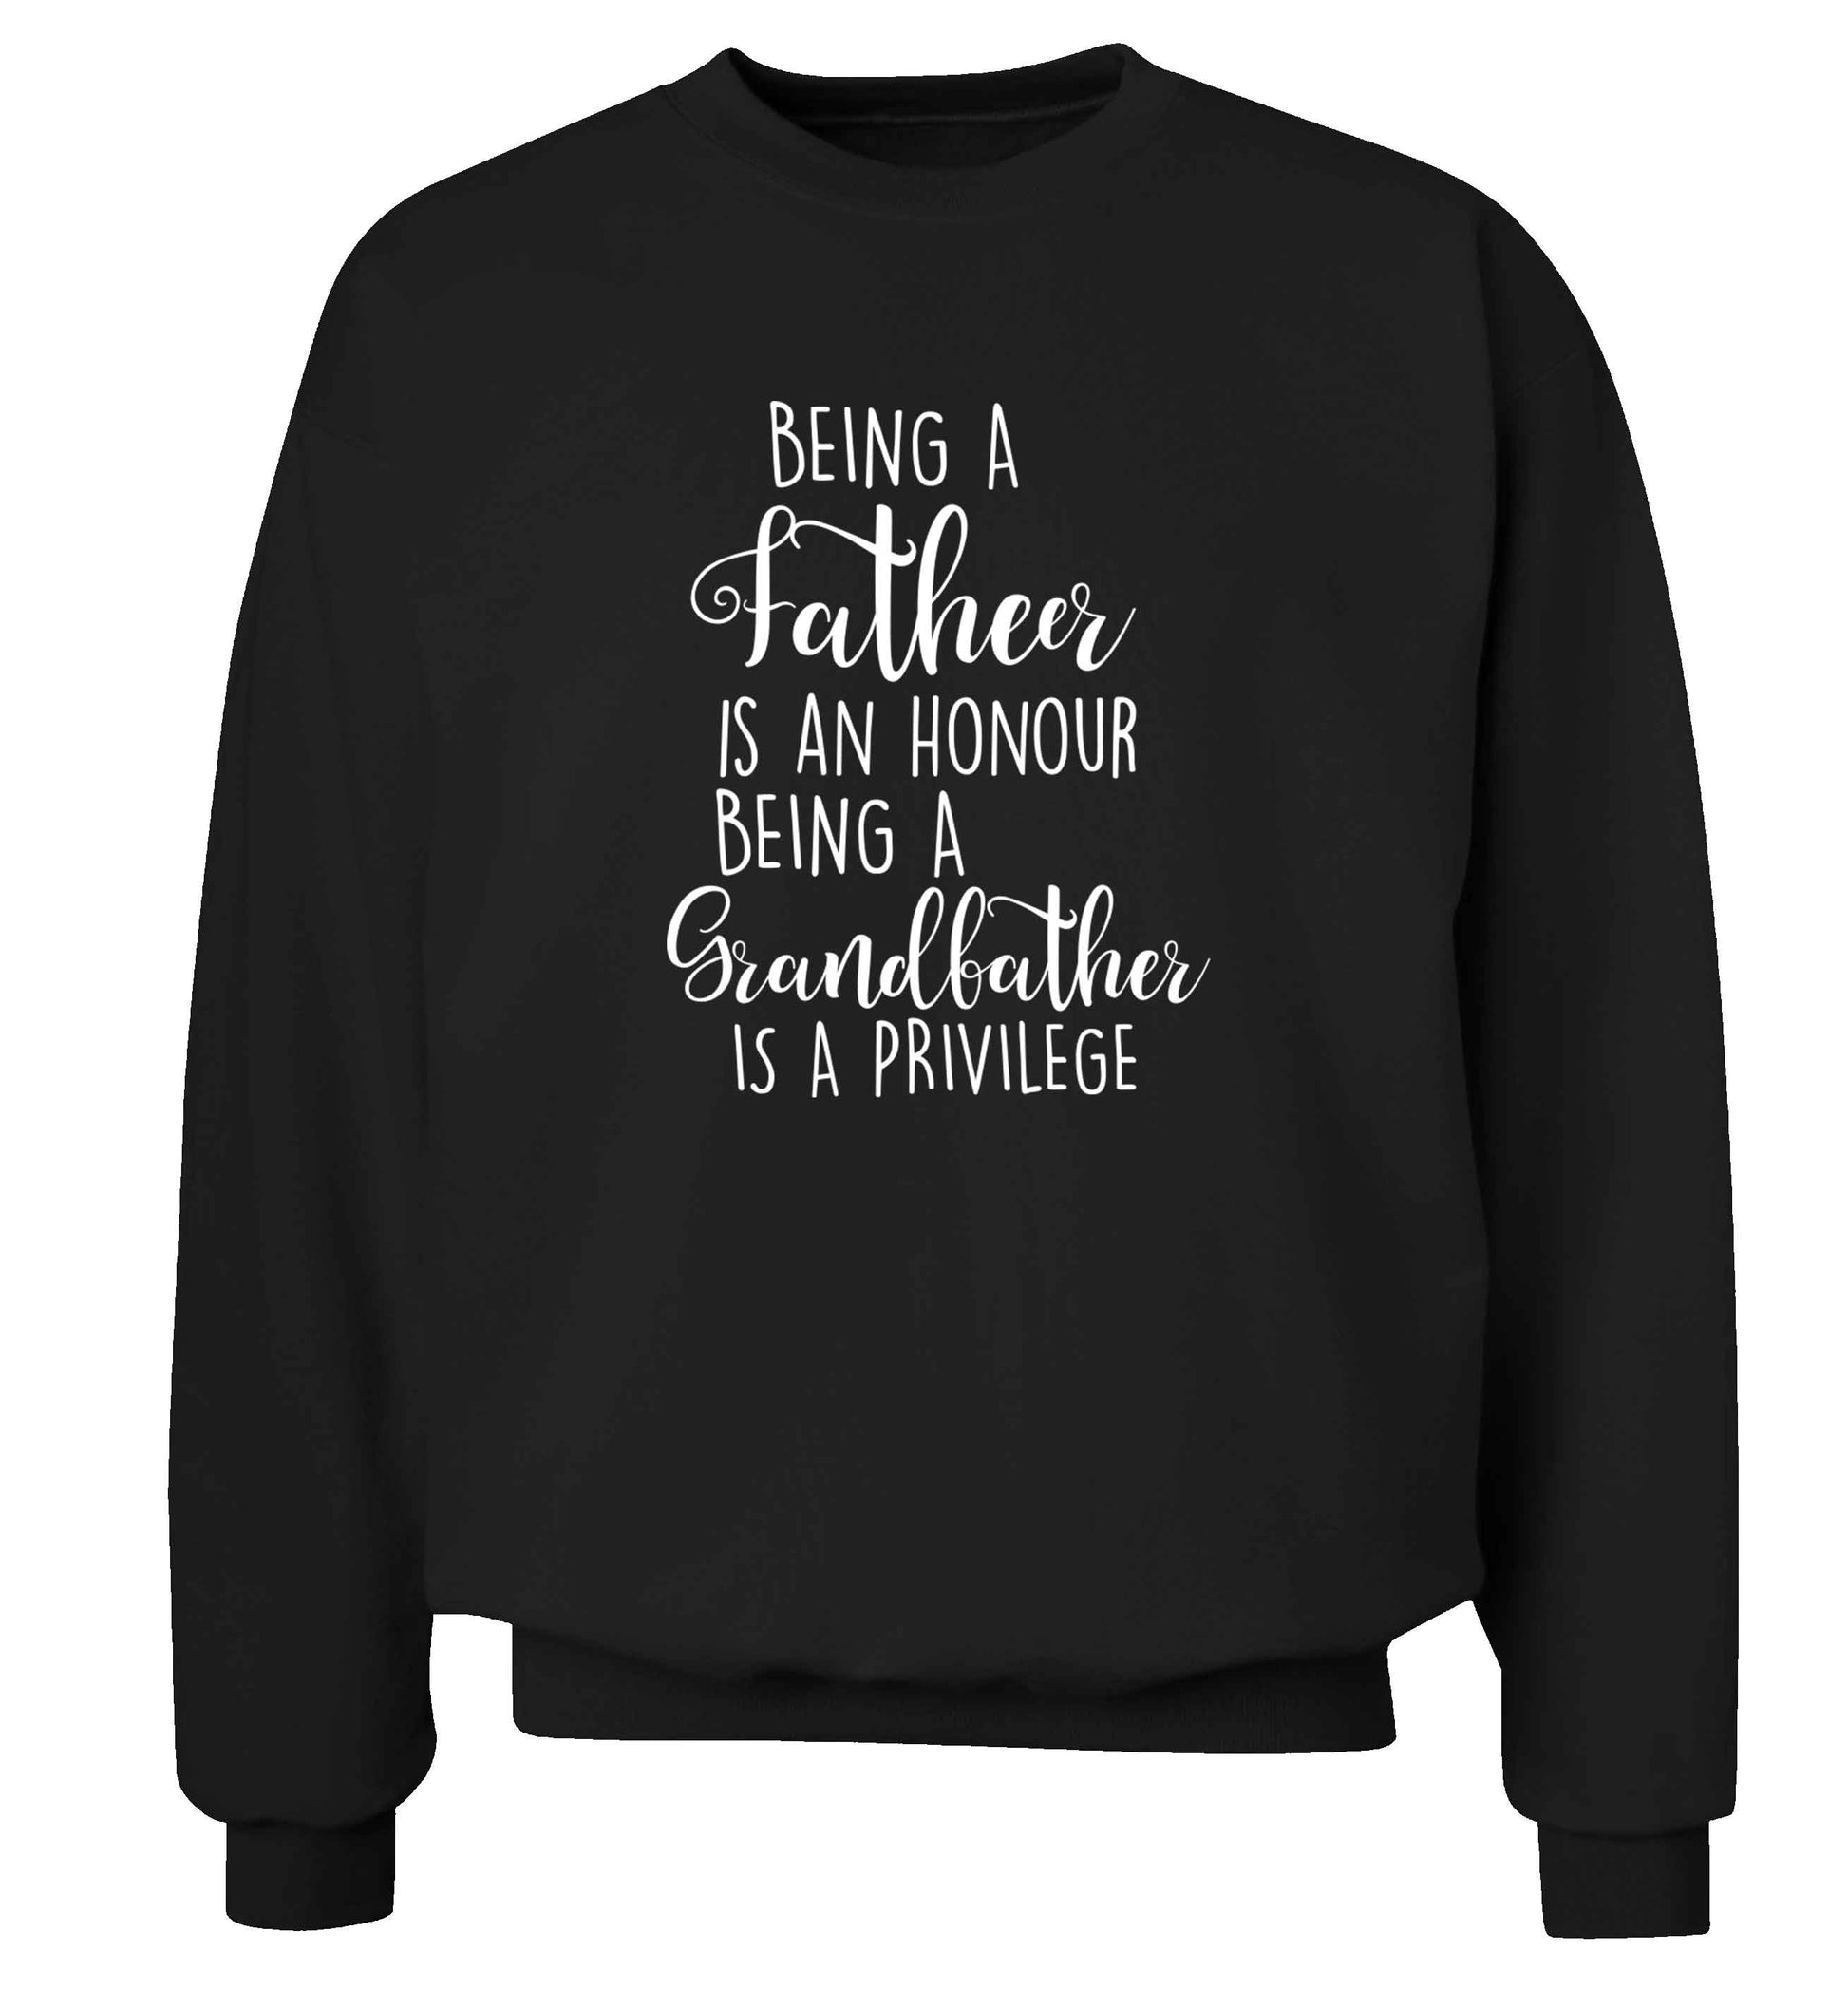 Being a father is an honour being a grandfather is a privilege Adult's unisex black Sweater 2XL